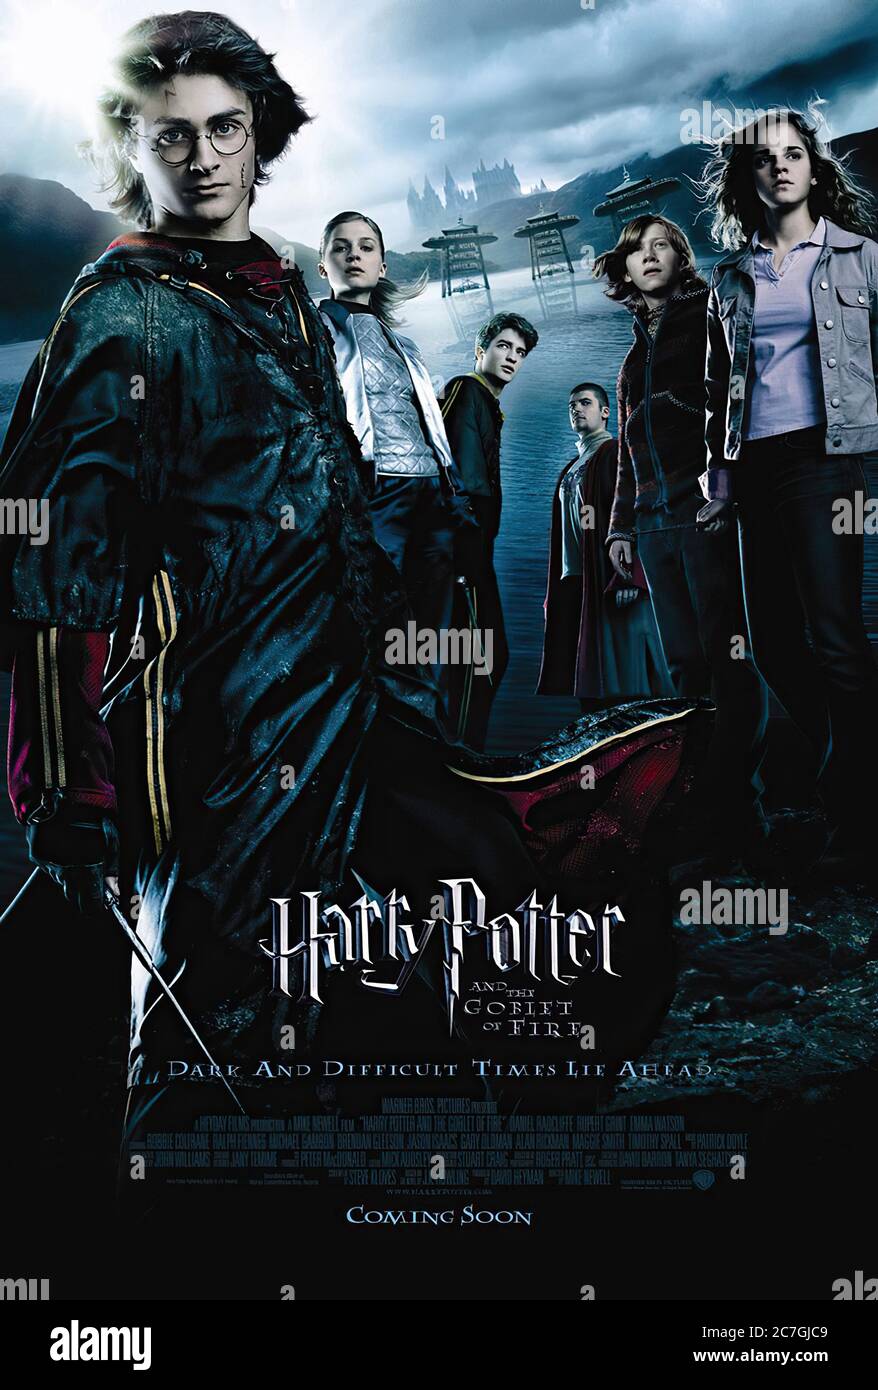 Harry Potter and the Goblet of Fire - Movie Poster Stock Photo